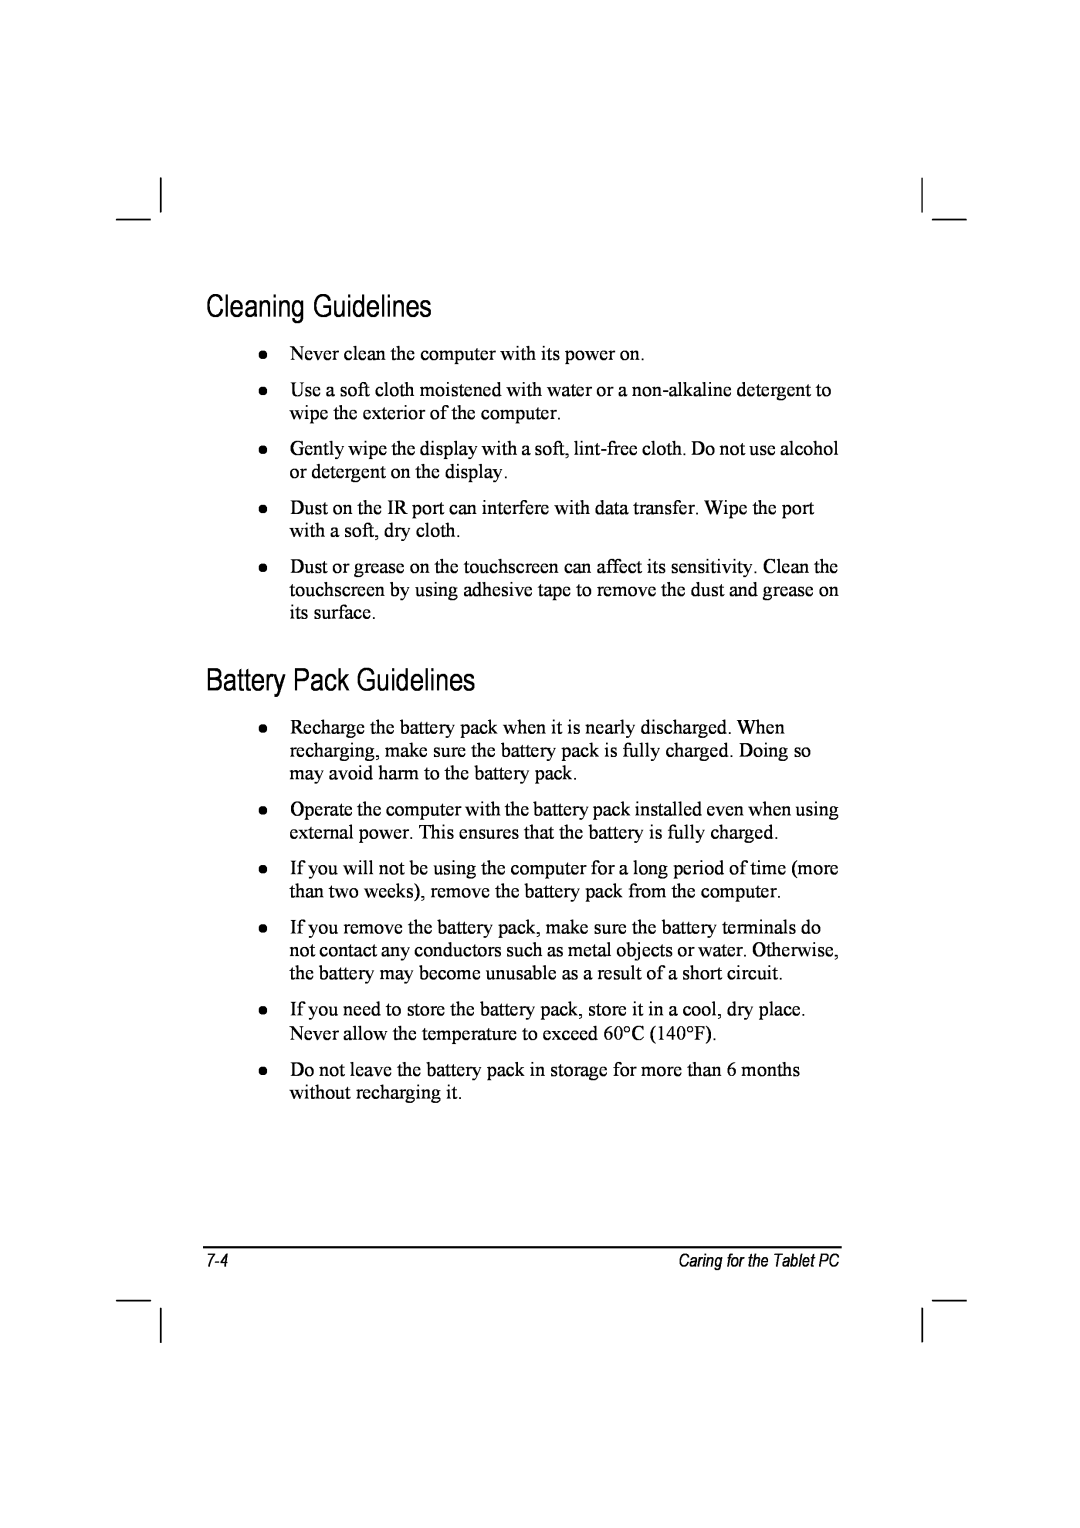 TAG 10 manual Cleaning Guidelines, Battery Pack Guidelines 